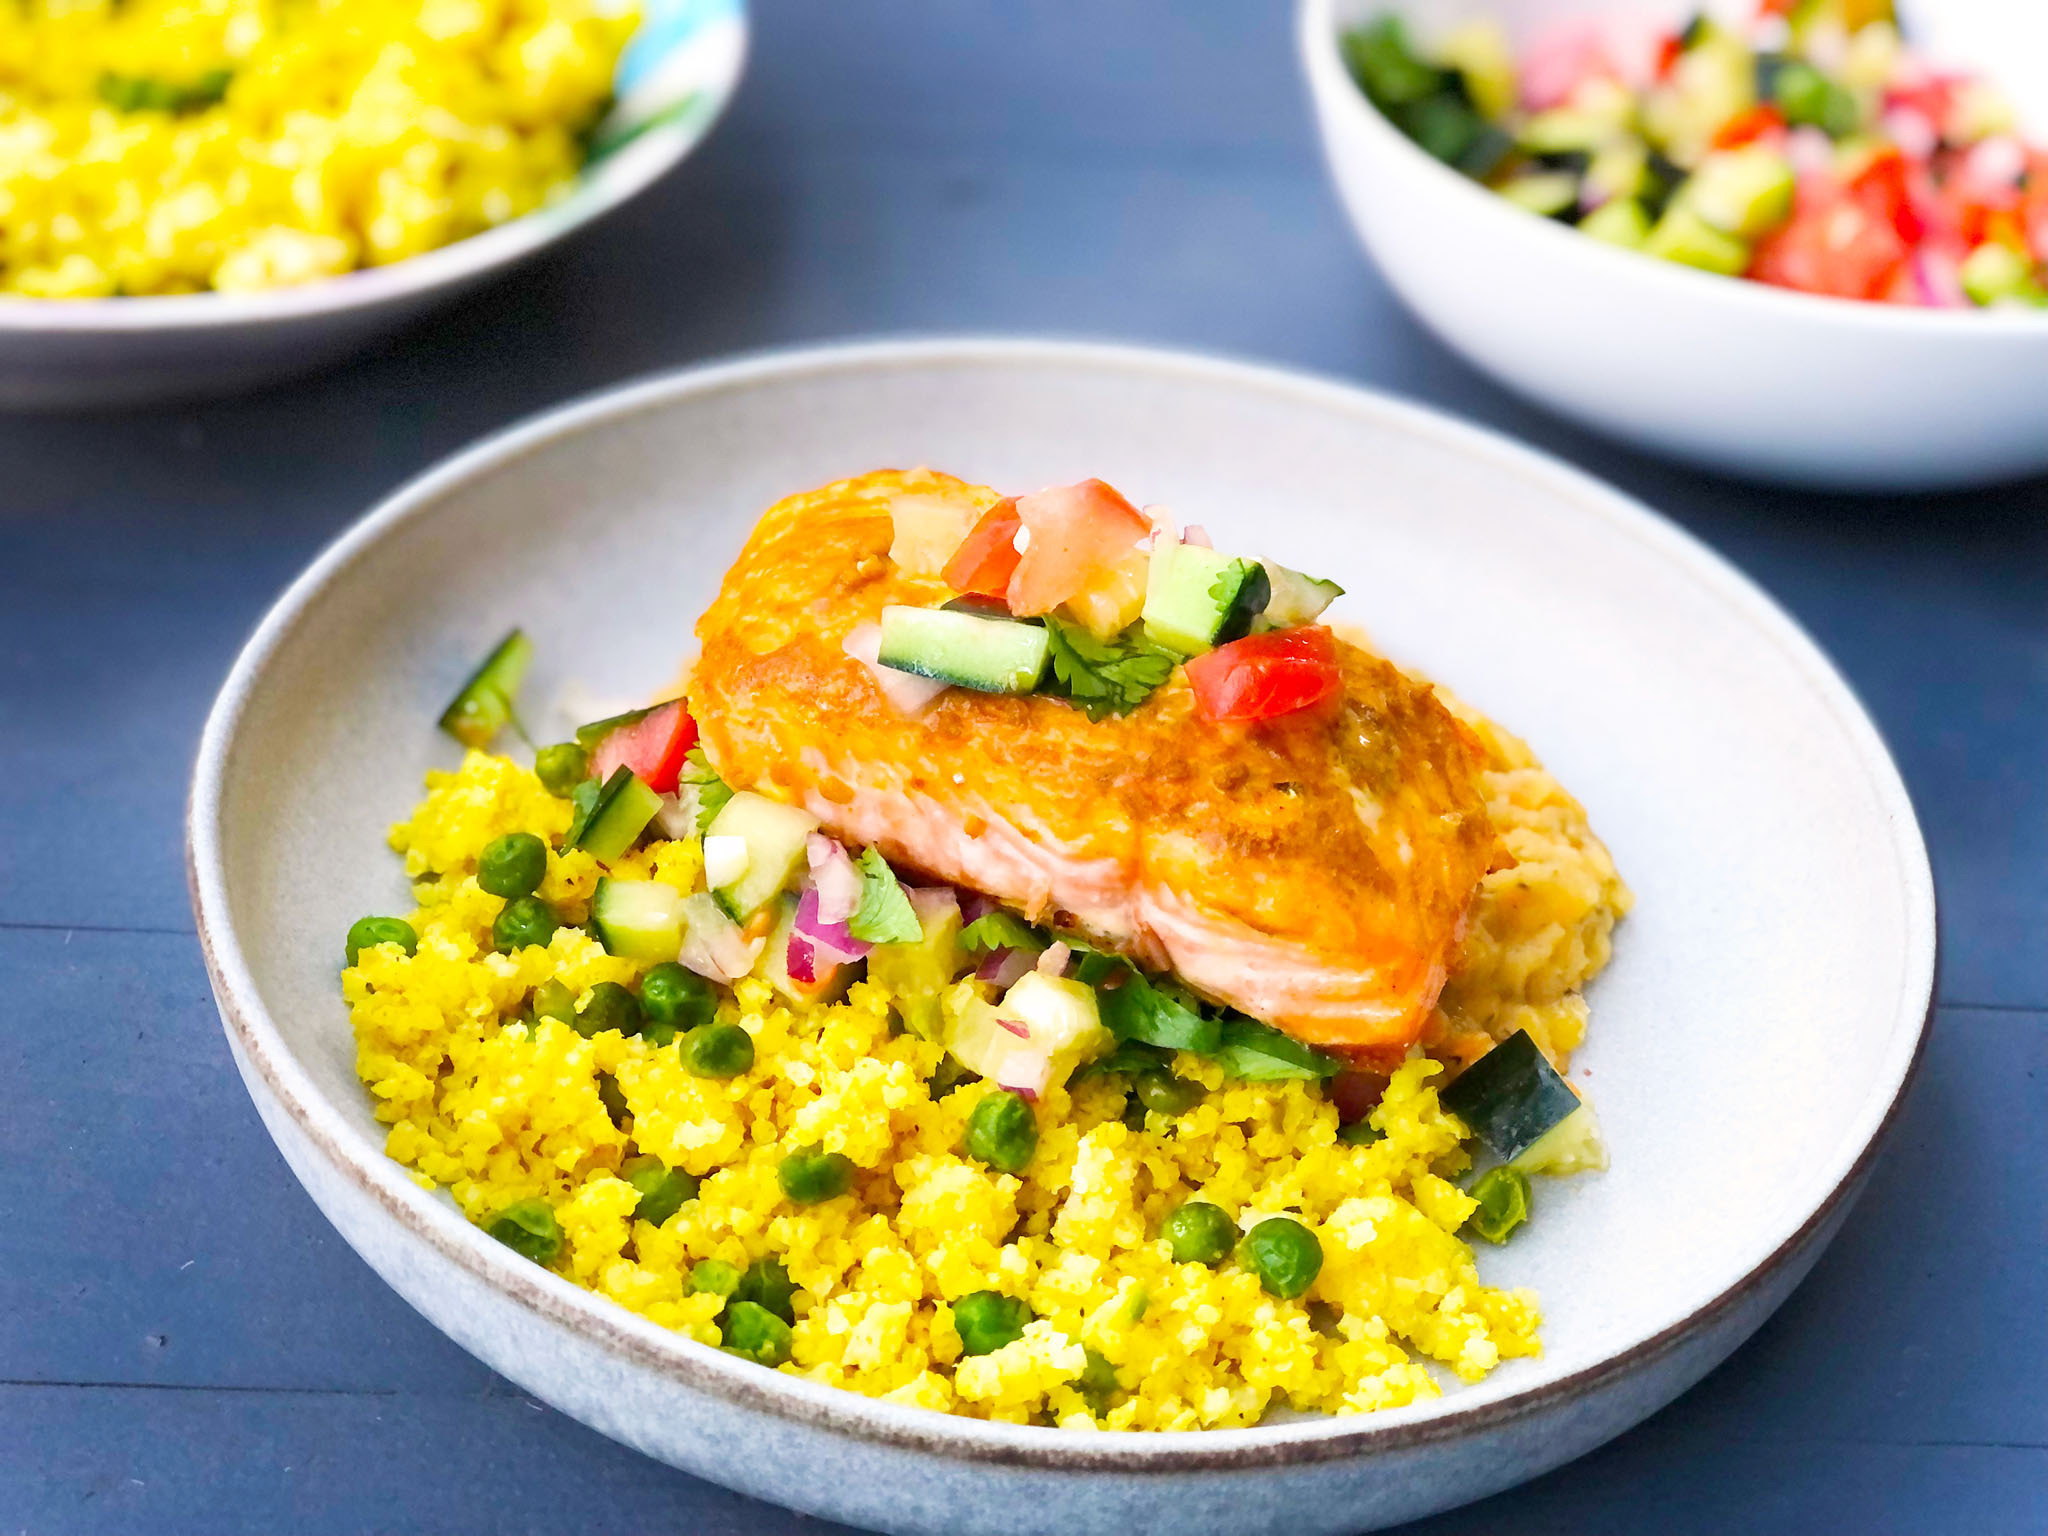 Garlic Spiced Salmon with Kachumber, served with Millet Tahari and Red Lentil Dal Image